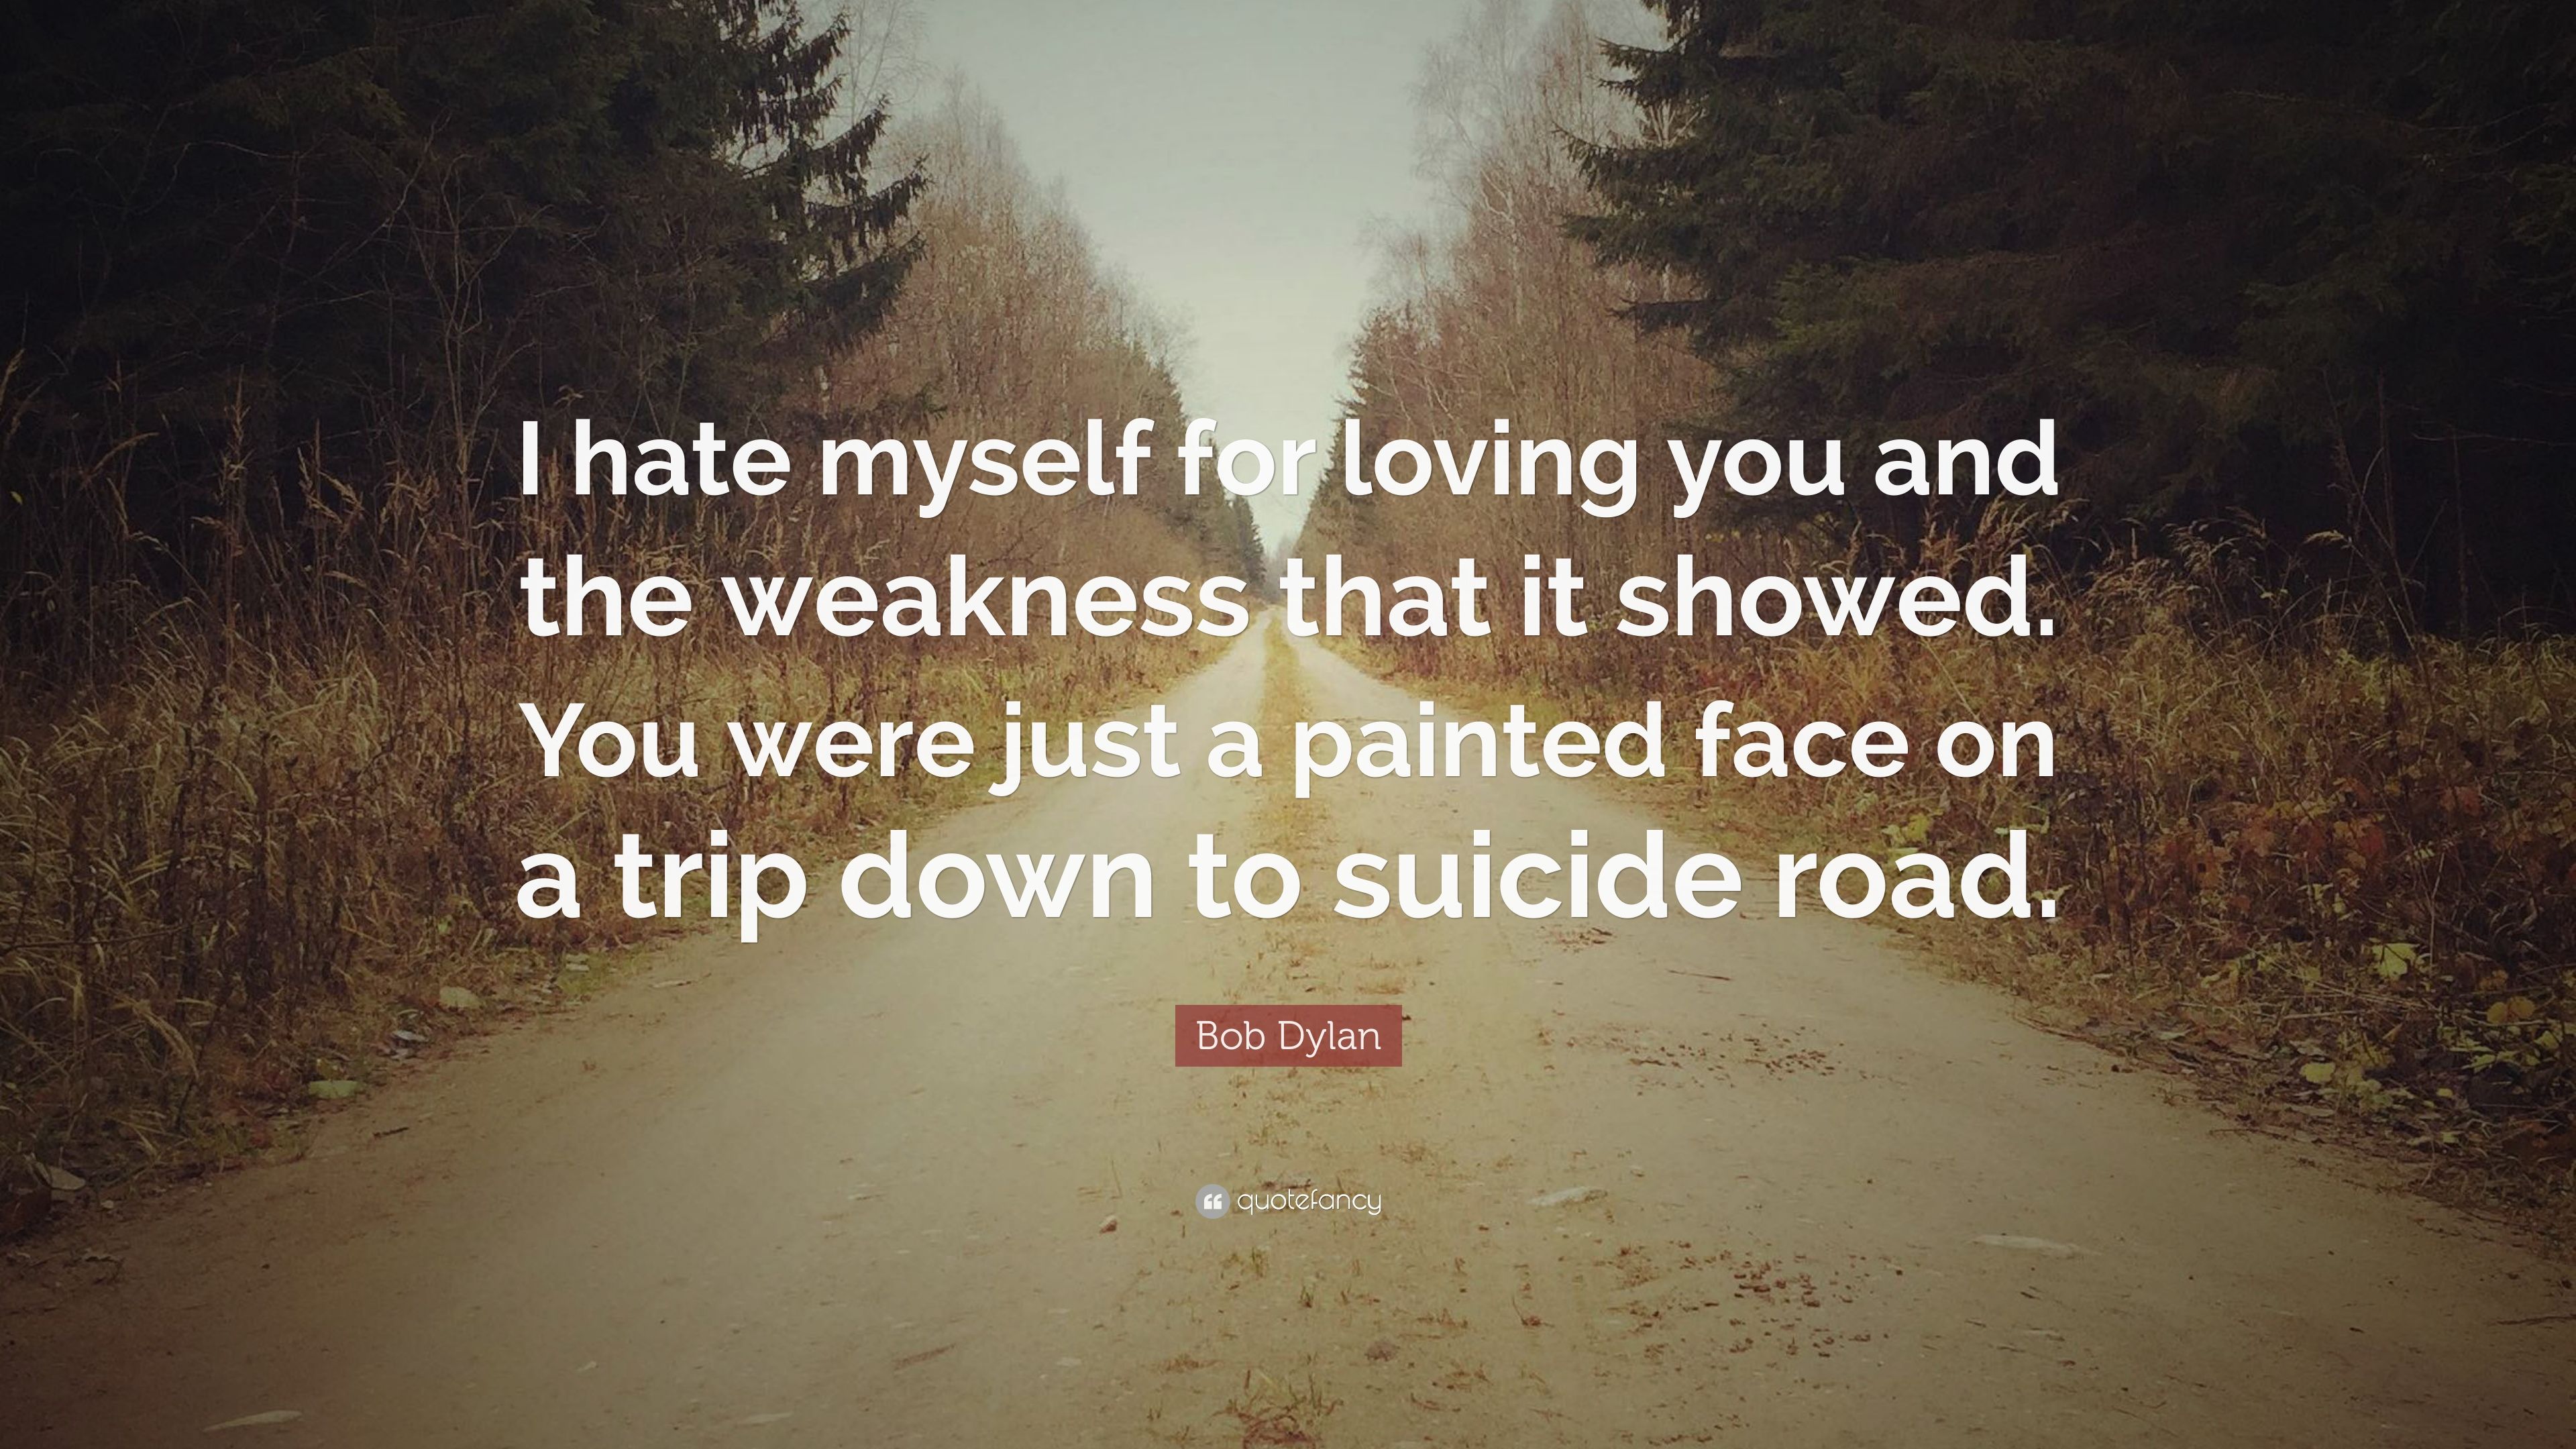 Bob Dylan Quote: “I hate myself for loving you and the weakness